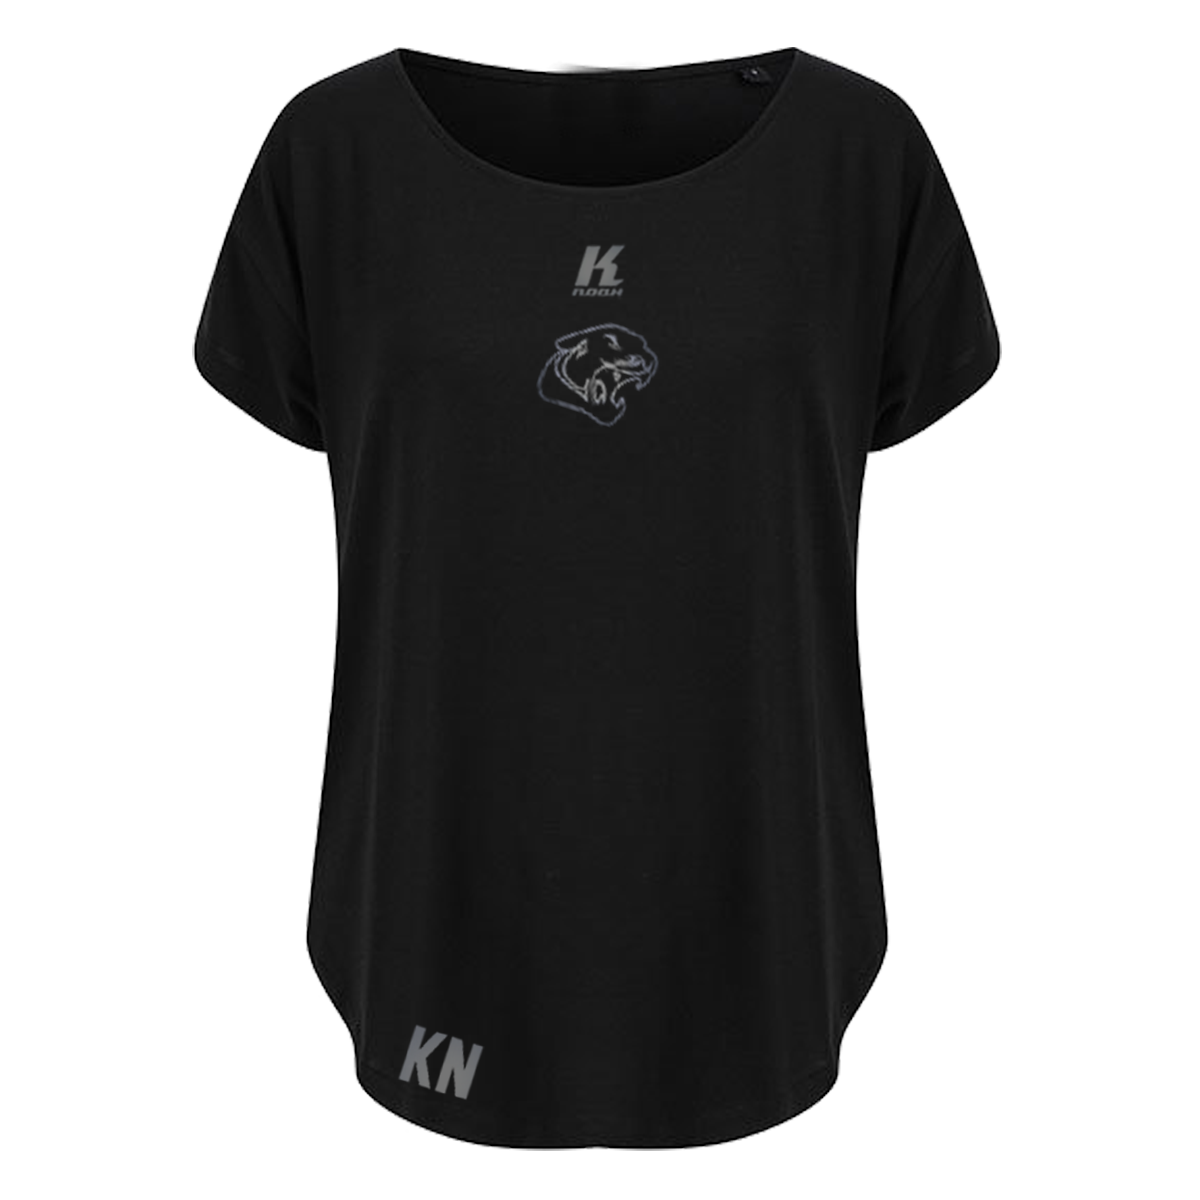 Cougars "Blackline" Womens Sports Tee TL527 with Initials/Playernumber